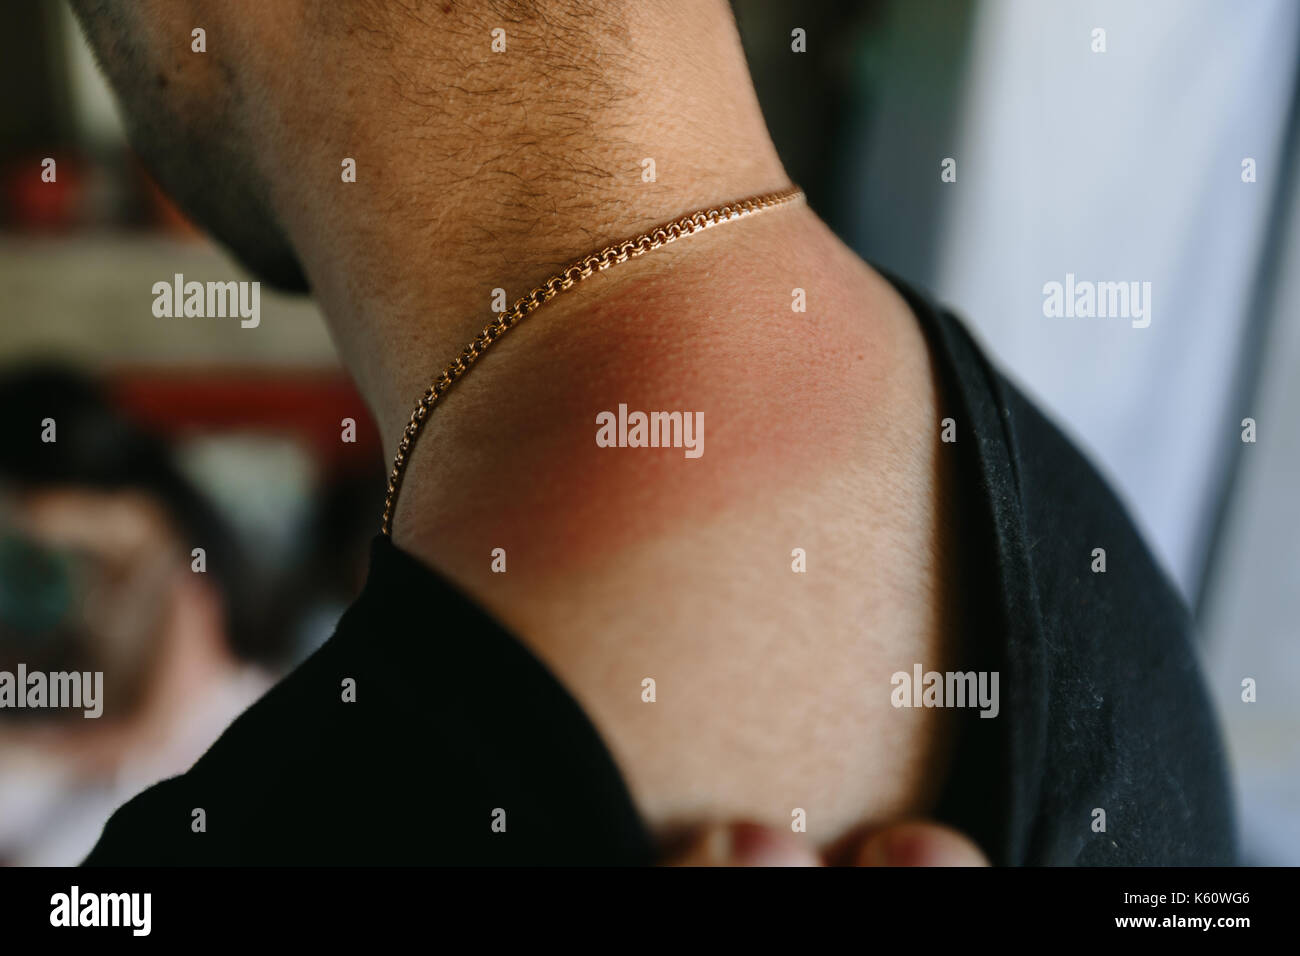 Trail of sunburn on the neck of a man Stock Photo